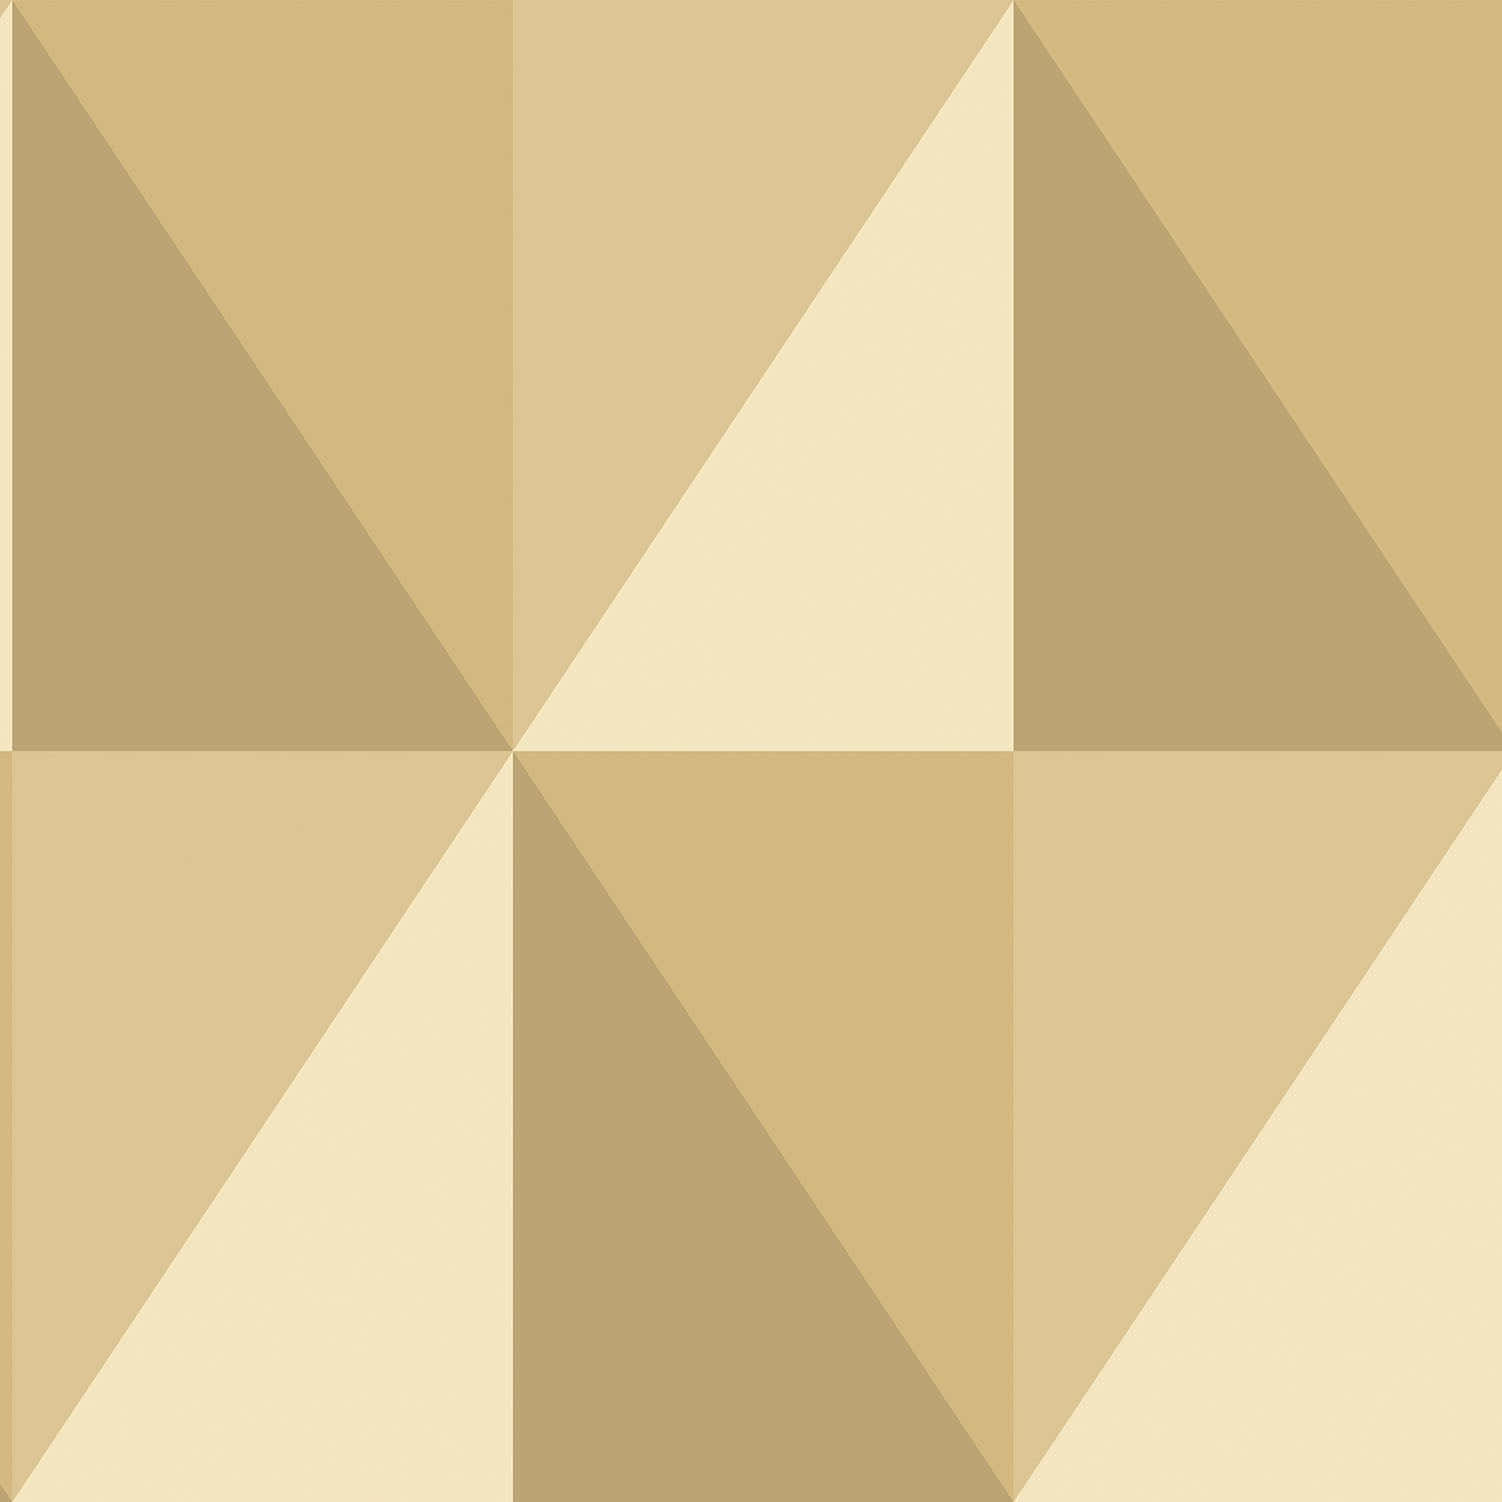 Obtuse Triangles With Beautiful Color Palette Wallpaper